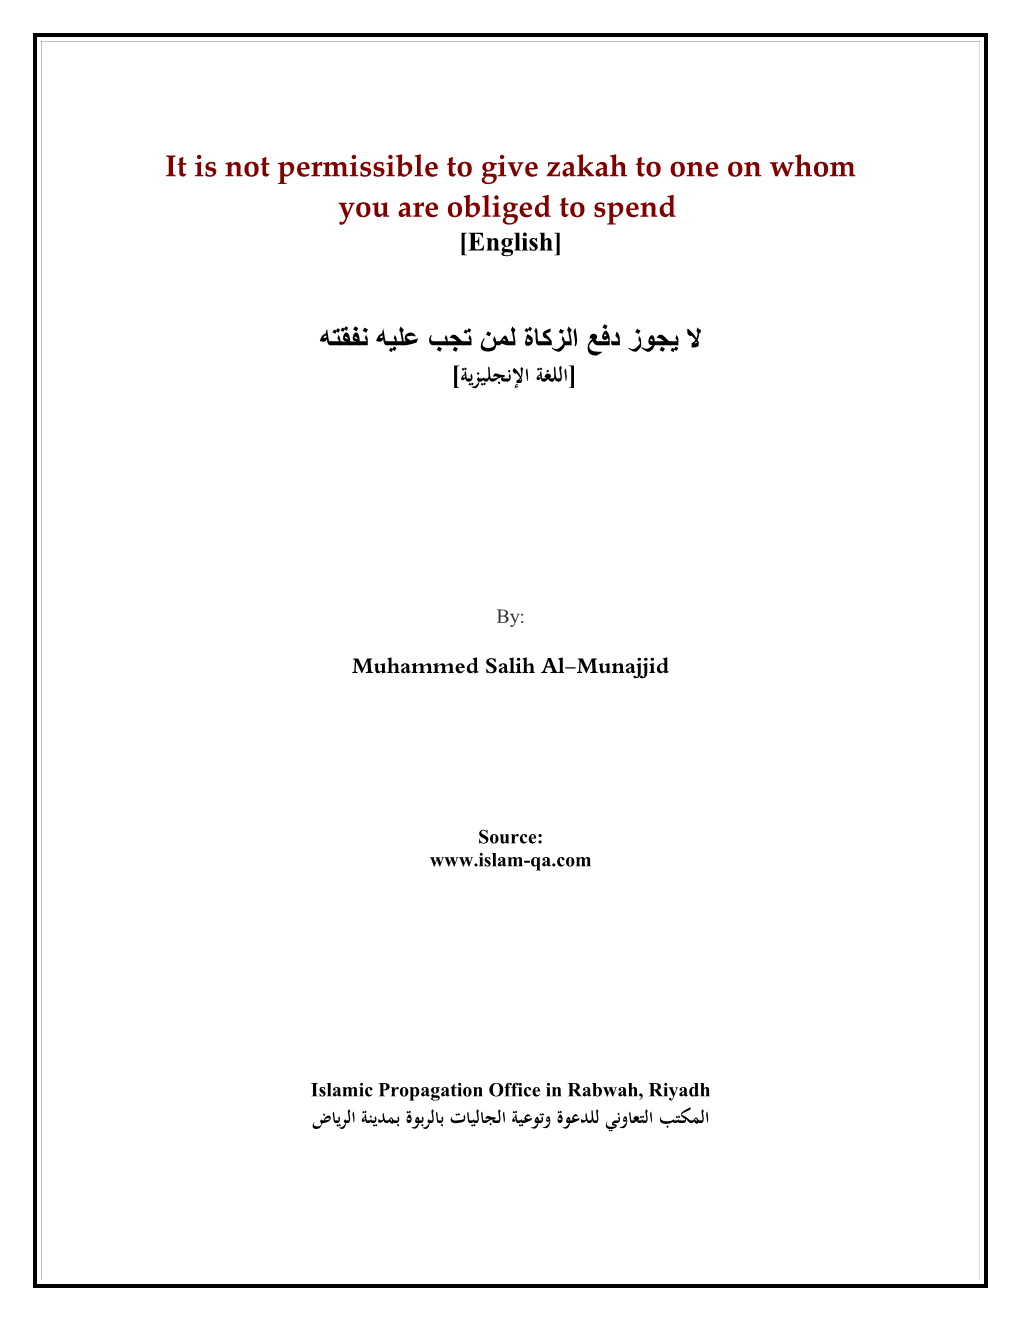 It Is Not Permissible to Give Zakah to One on Whom You Are Obliged to Spend